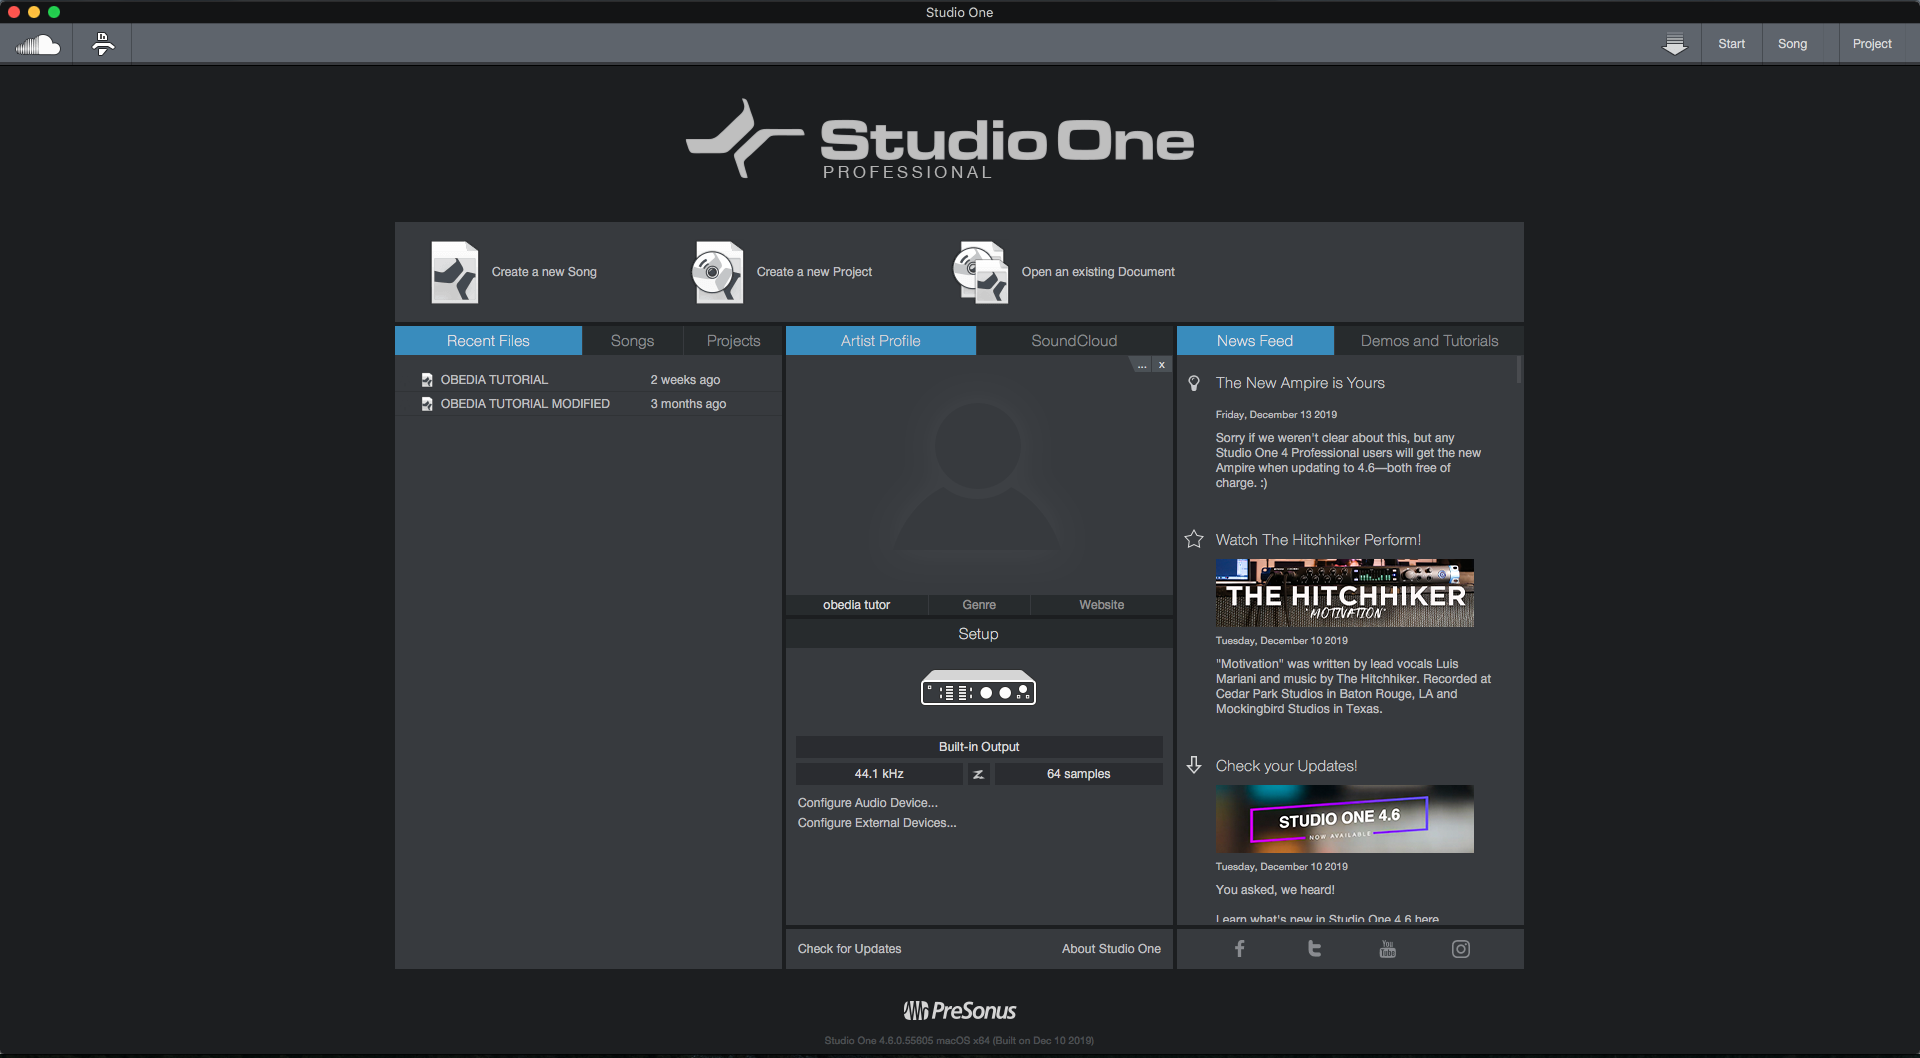 Studio One 4.6 New Features - Part 4: New Podcast Production Song Template  - PCAudioLabs